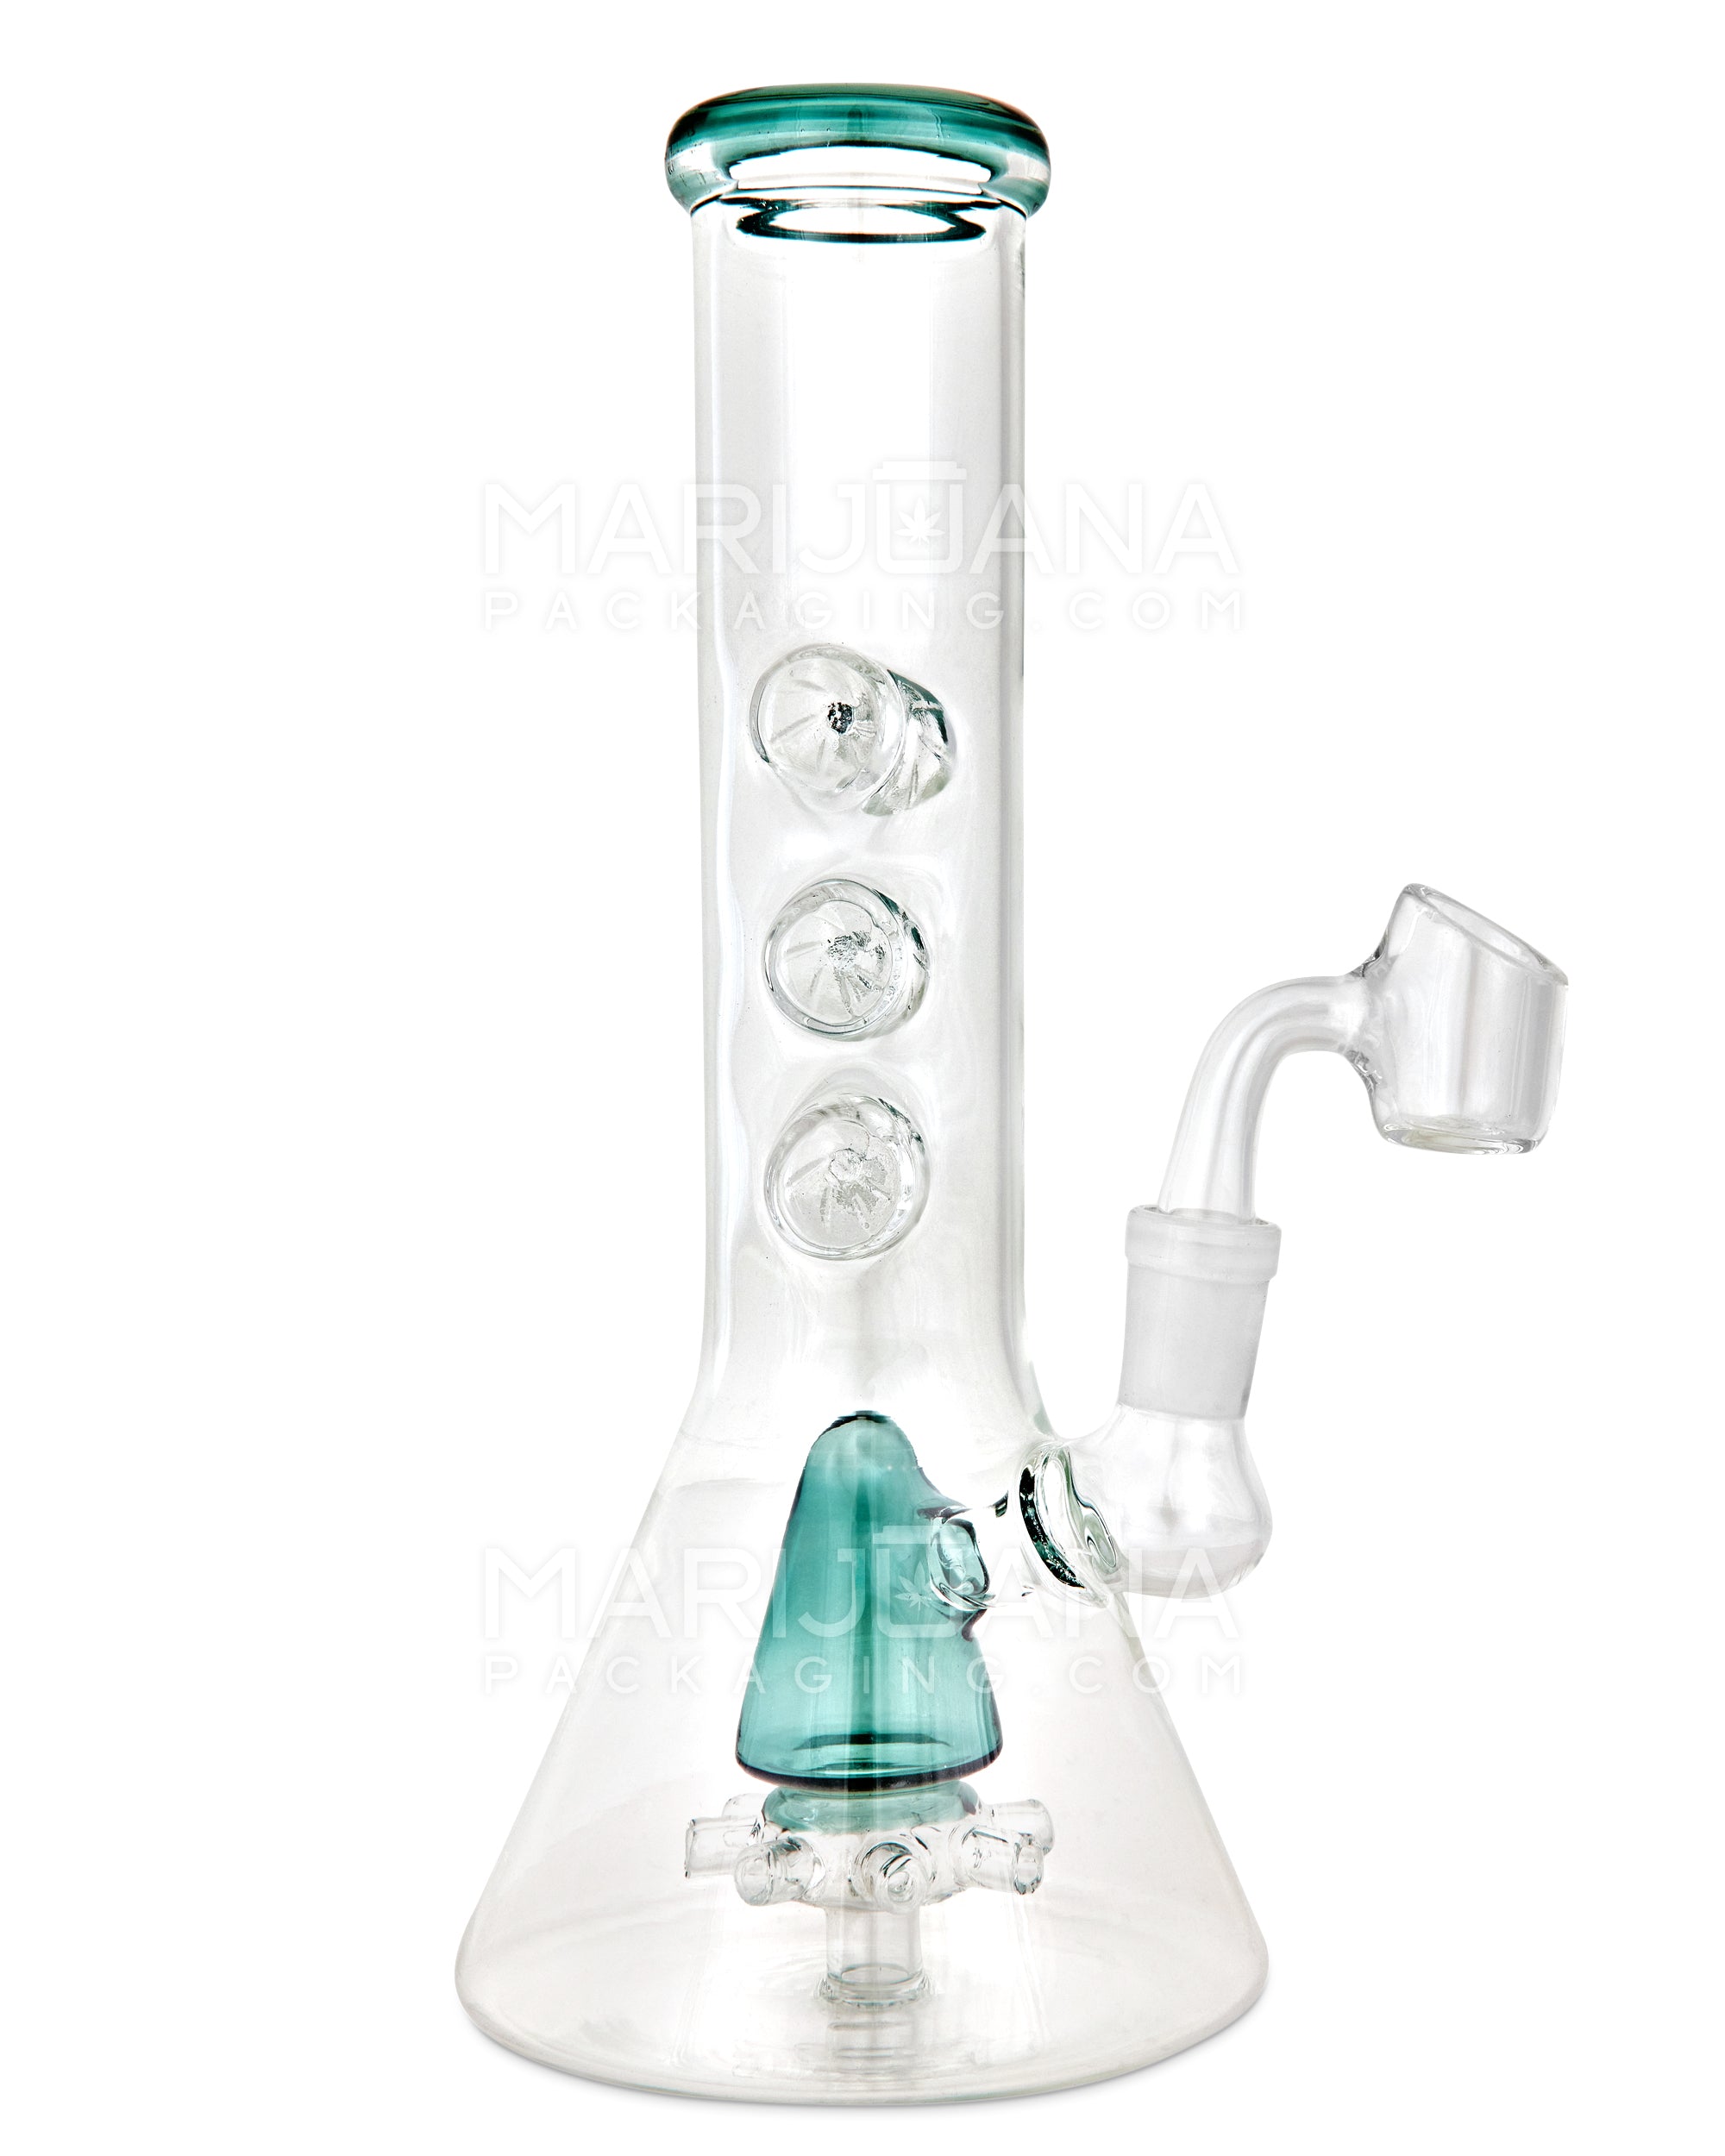 Straight Neck Atomic Perc Glass Beaker Water Pipe w/ Ice Catcher | 10in Tall - 14mm Bowl - Teal - 1